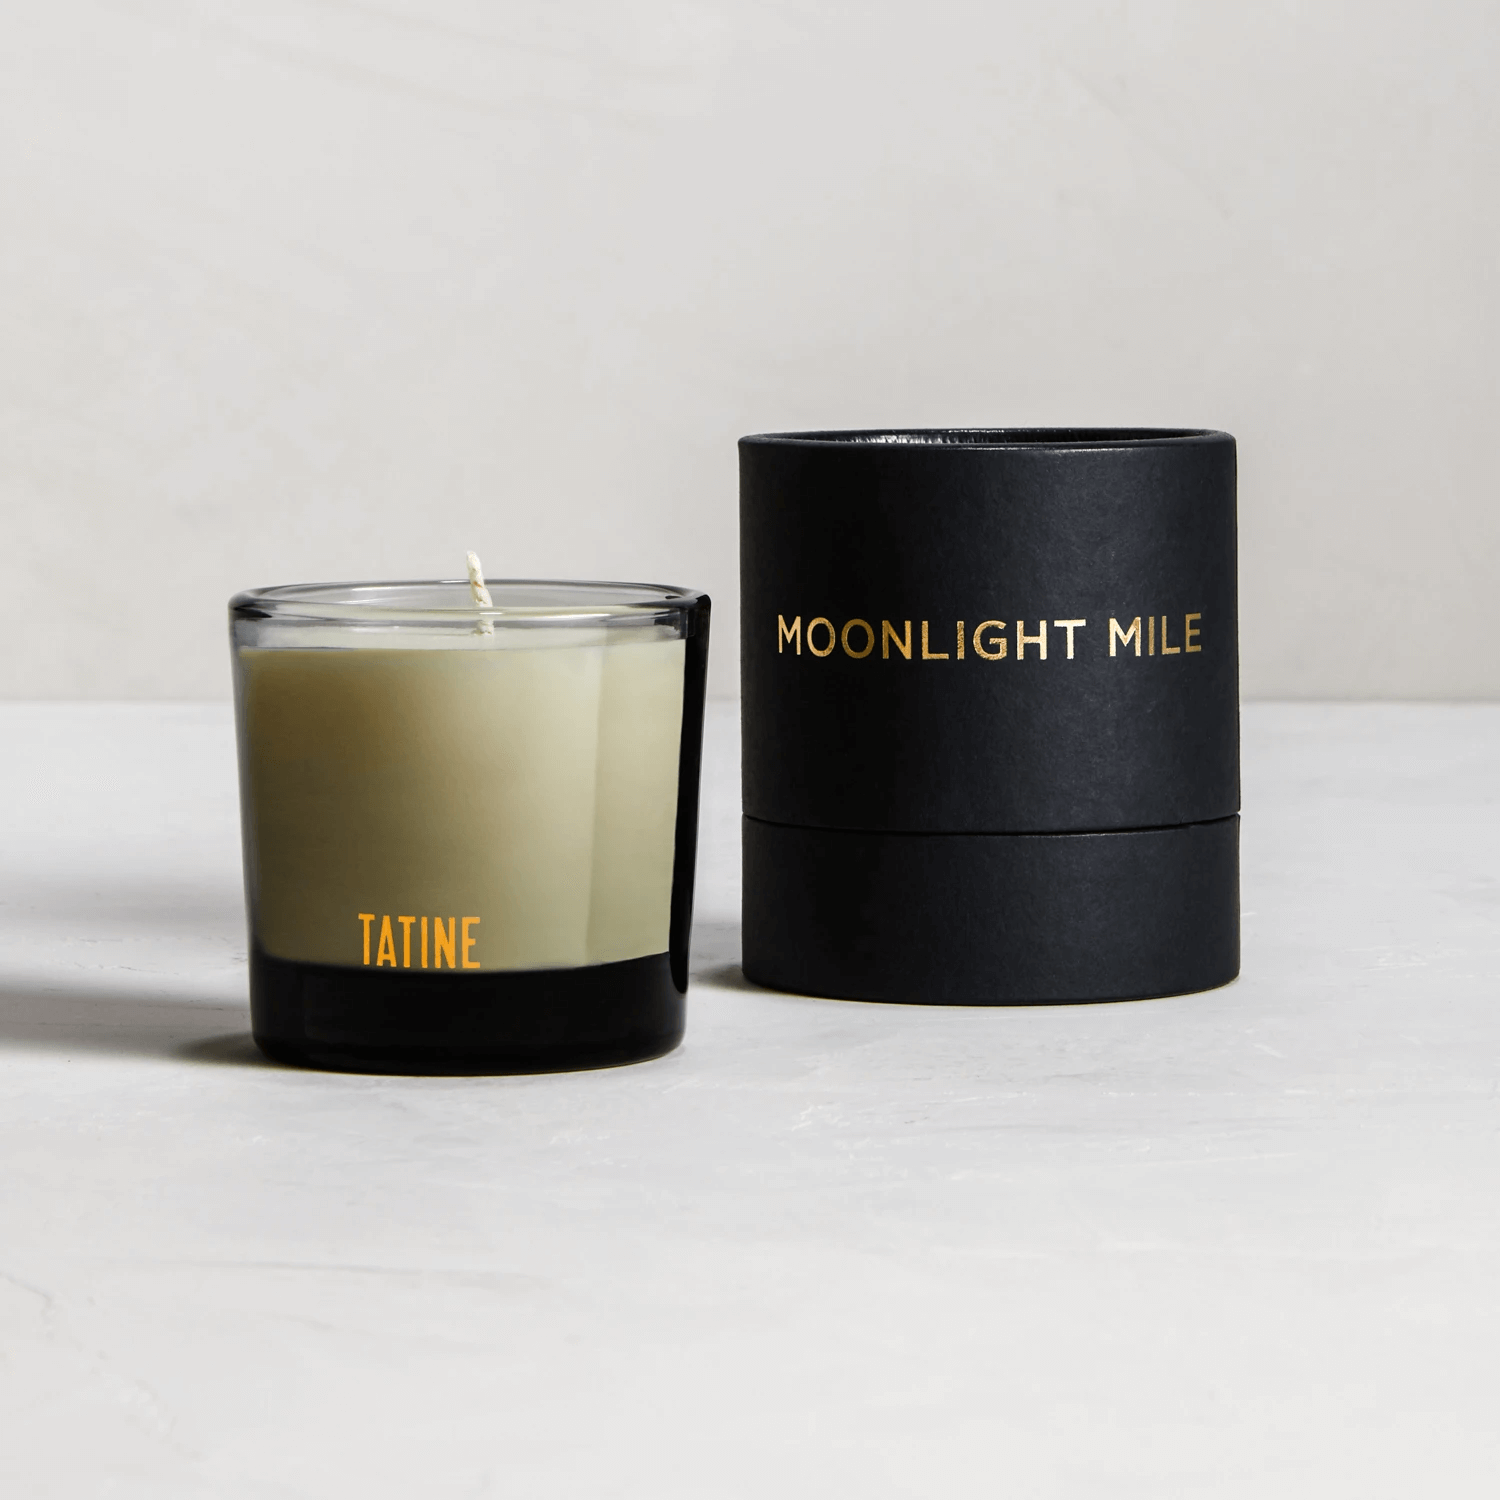 Moonlight Mile Scented Candle by Tatine